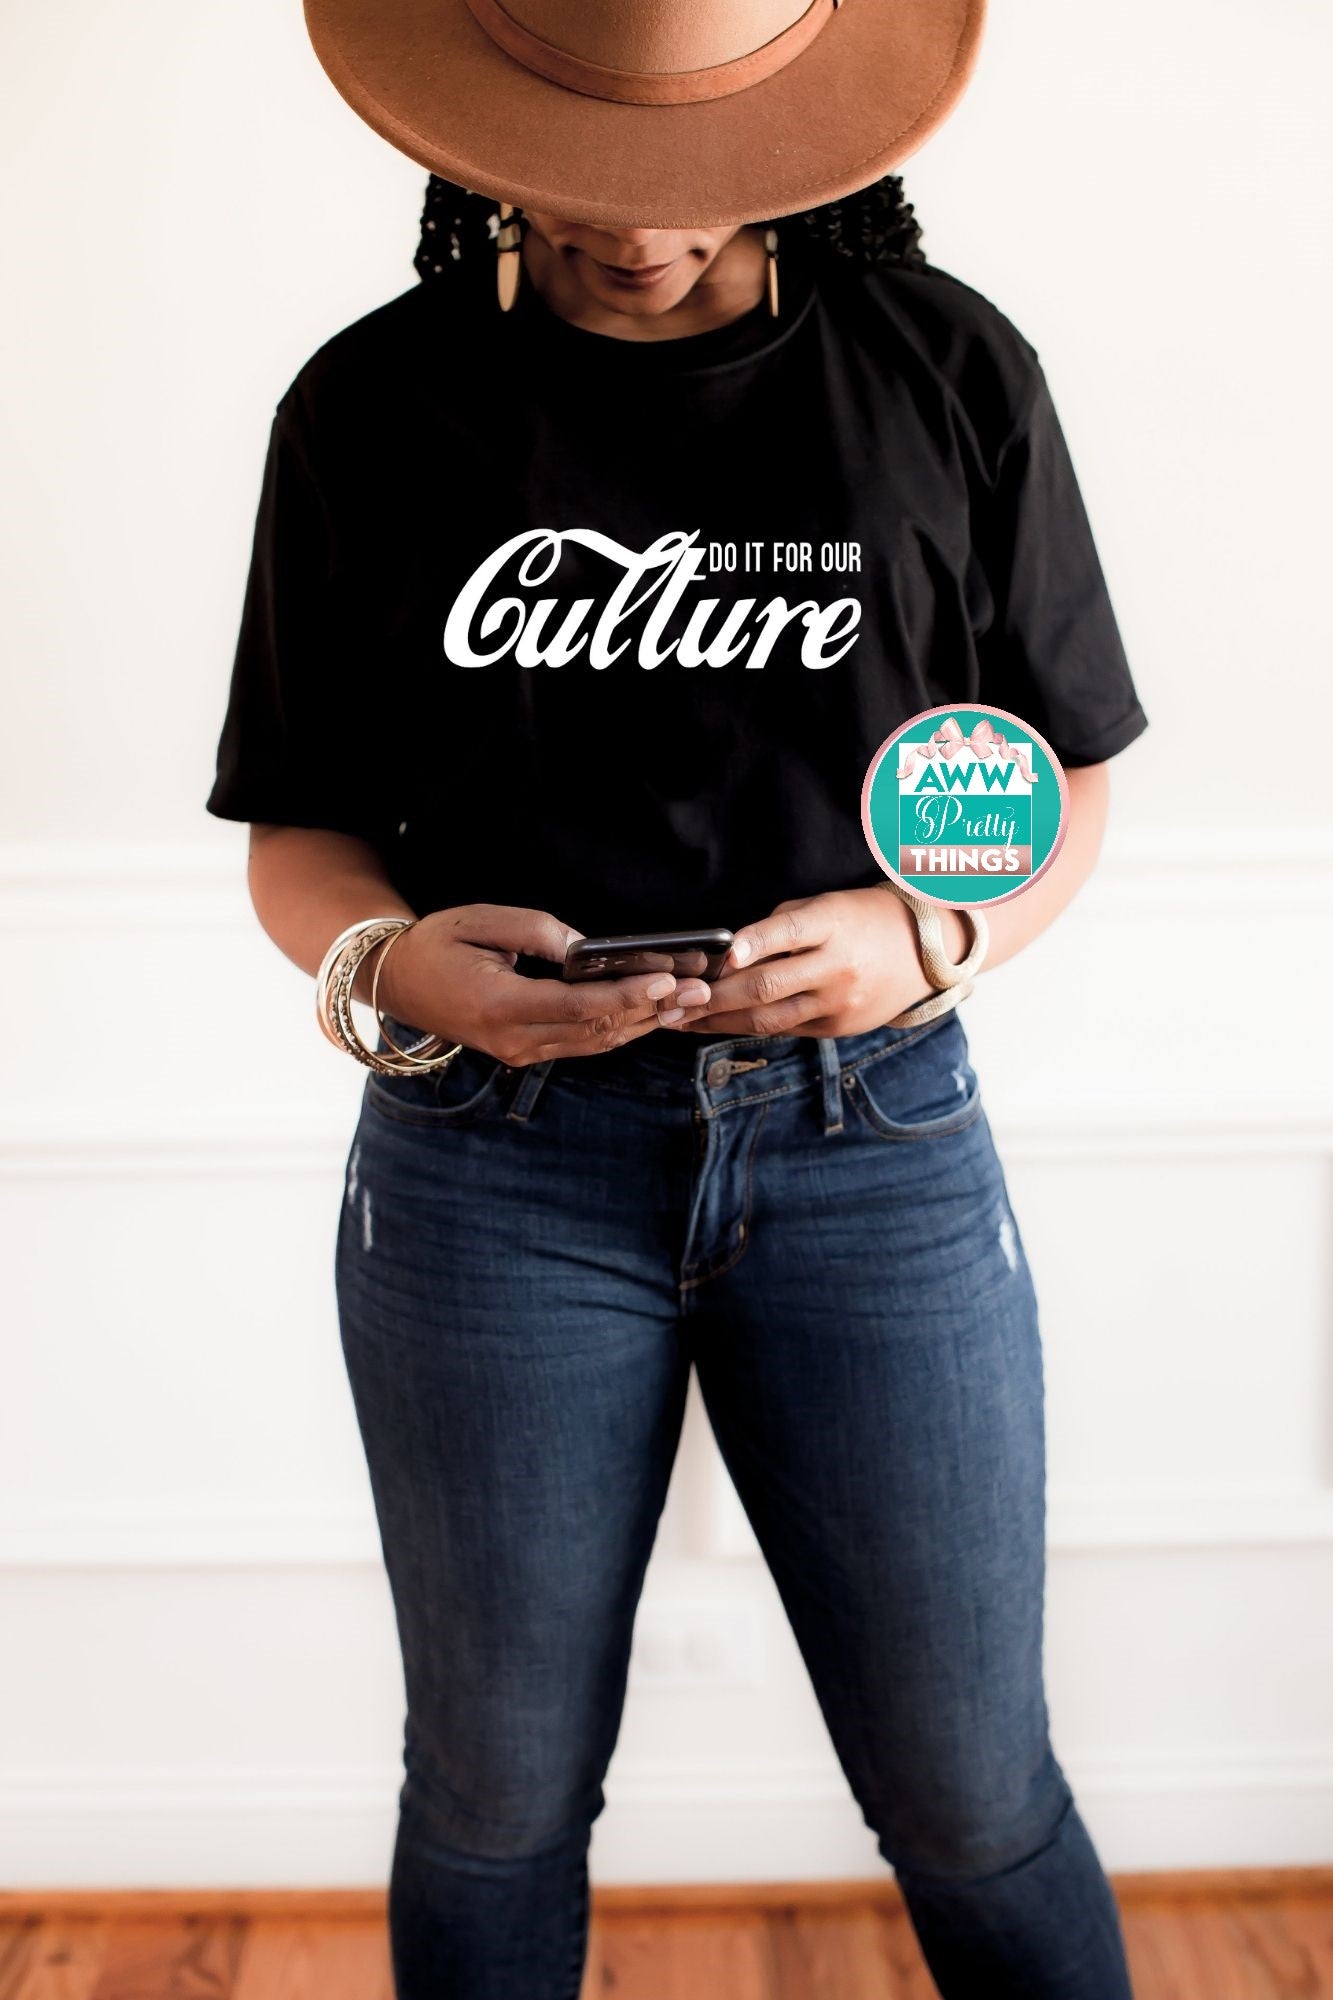 Do It For Our Culture Shirt